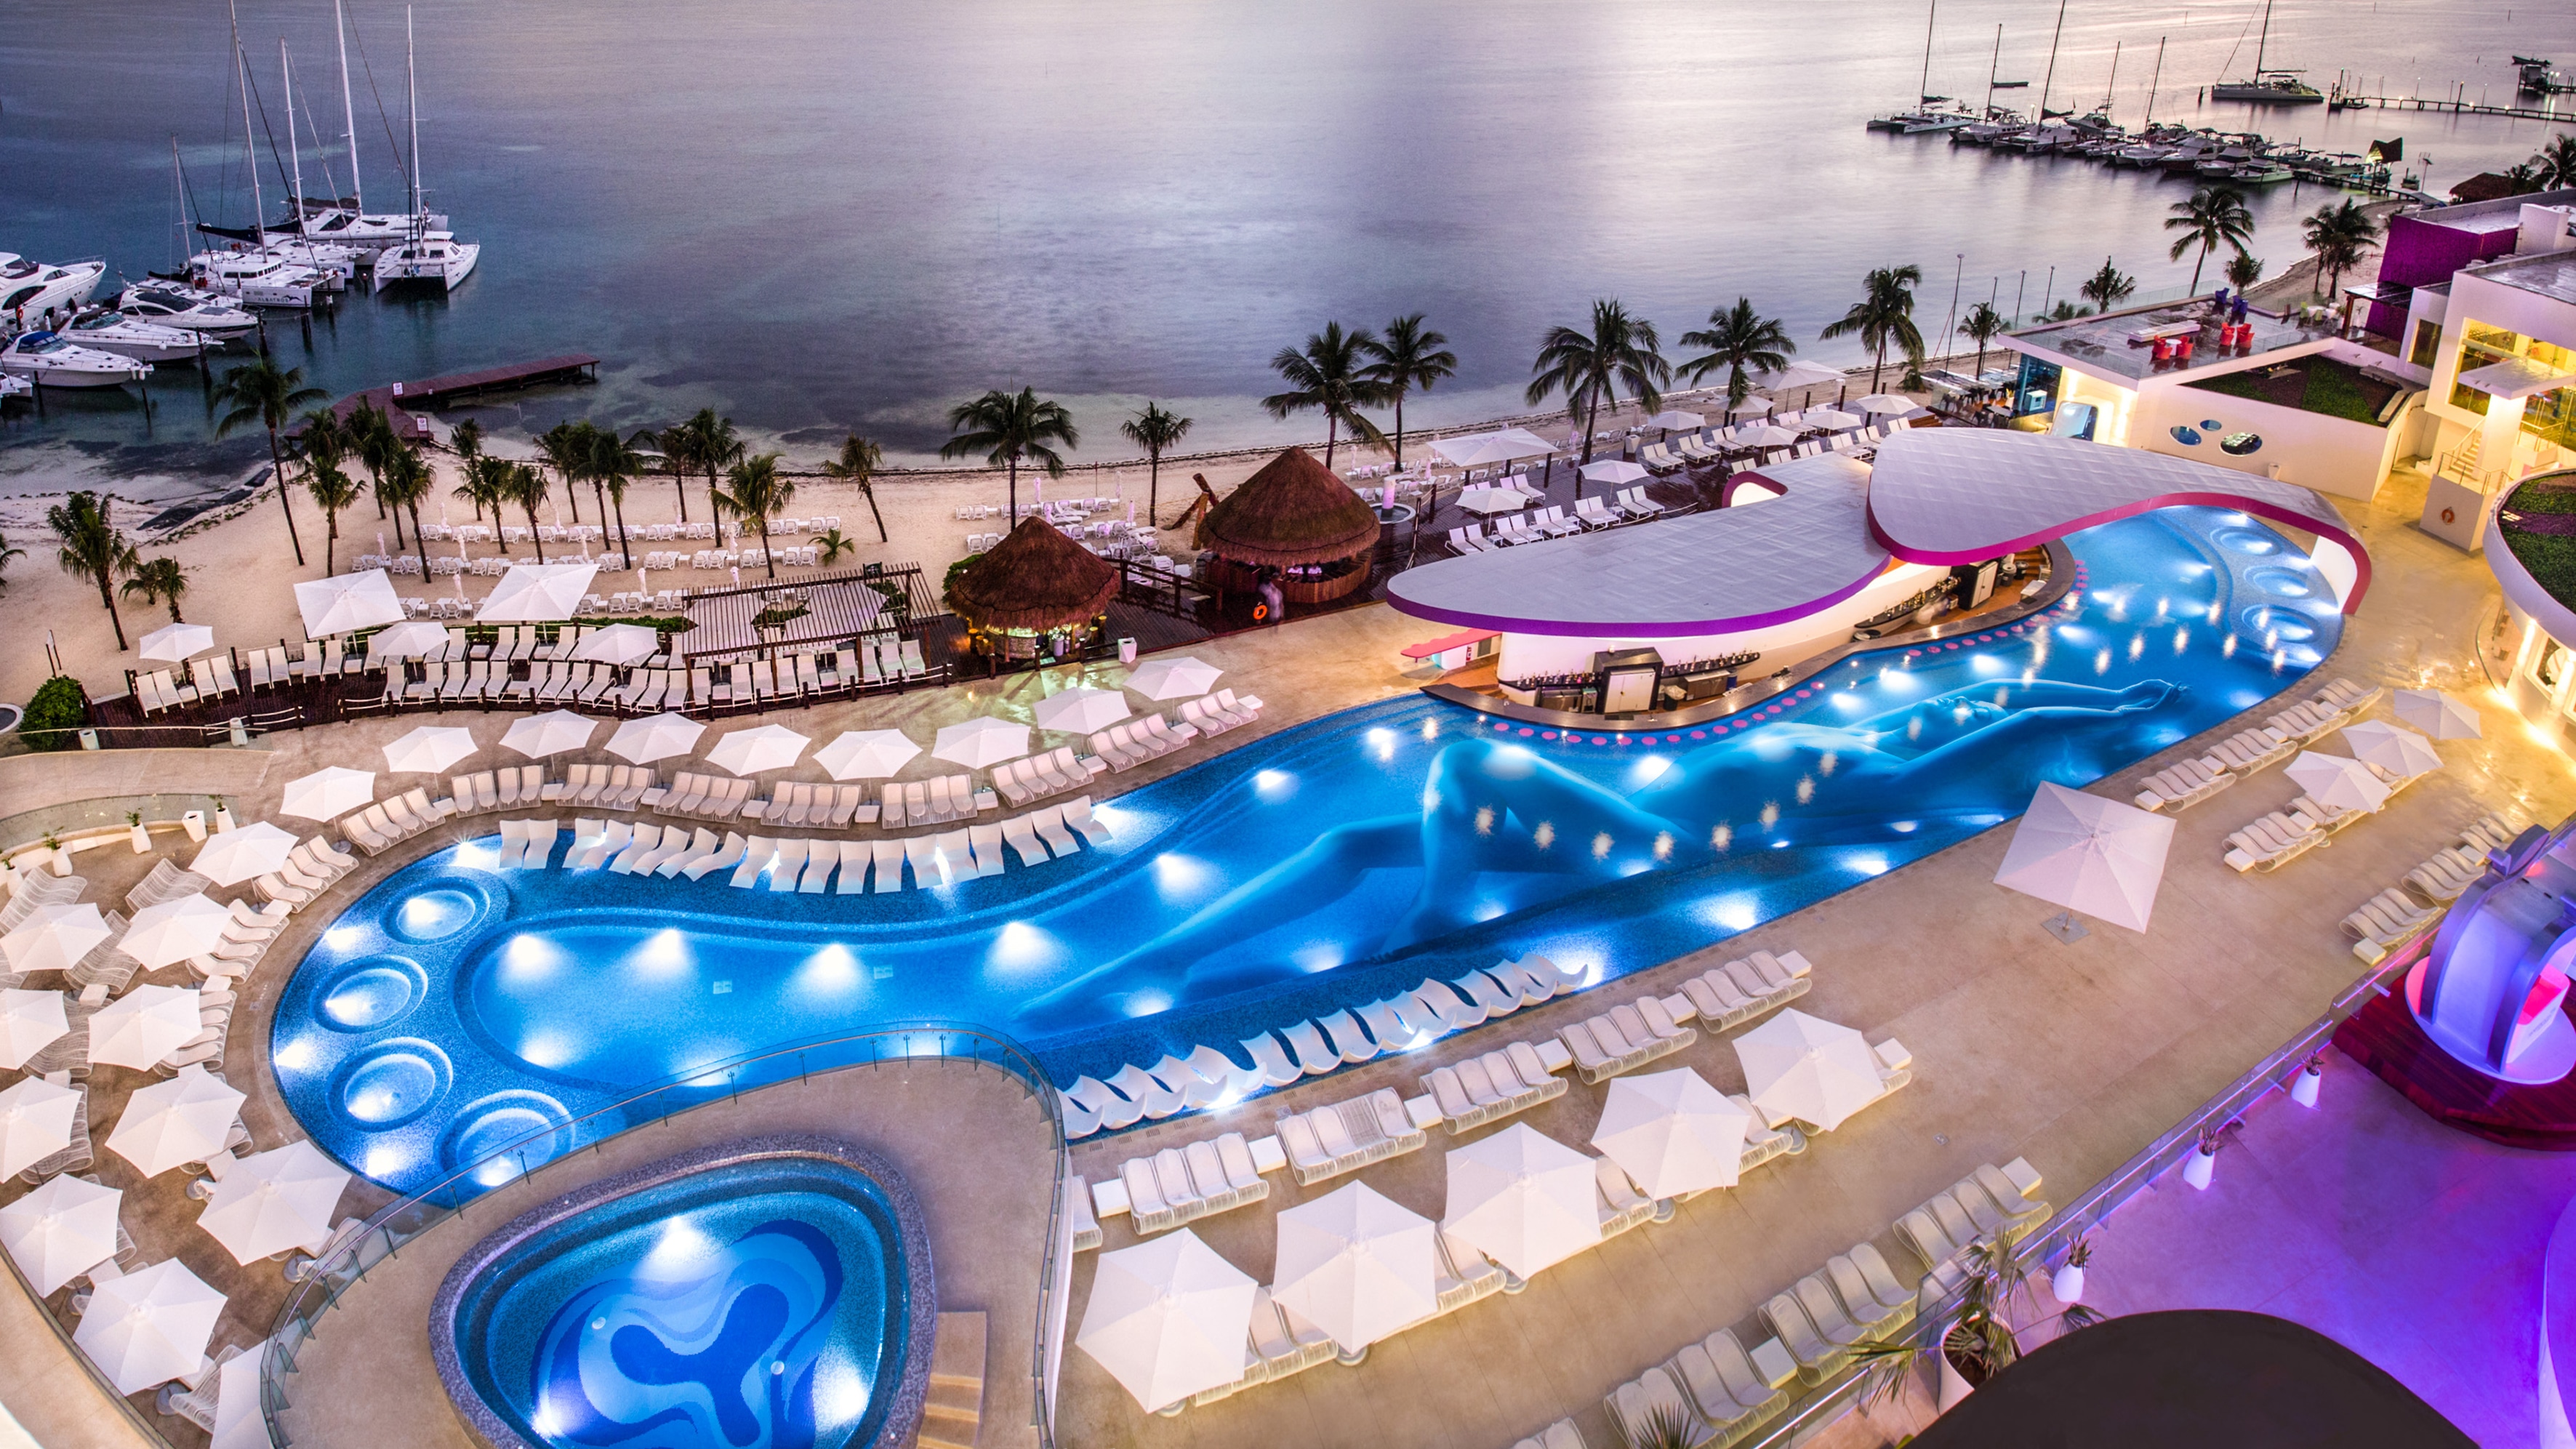 Best brand launch: Newlink’s stellar campaign repositions adults-only Cancun resort